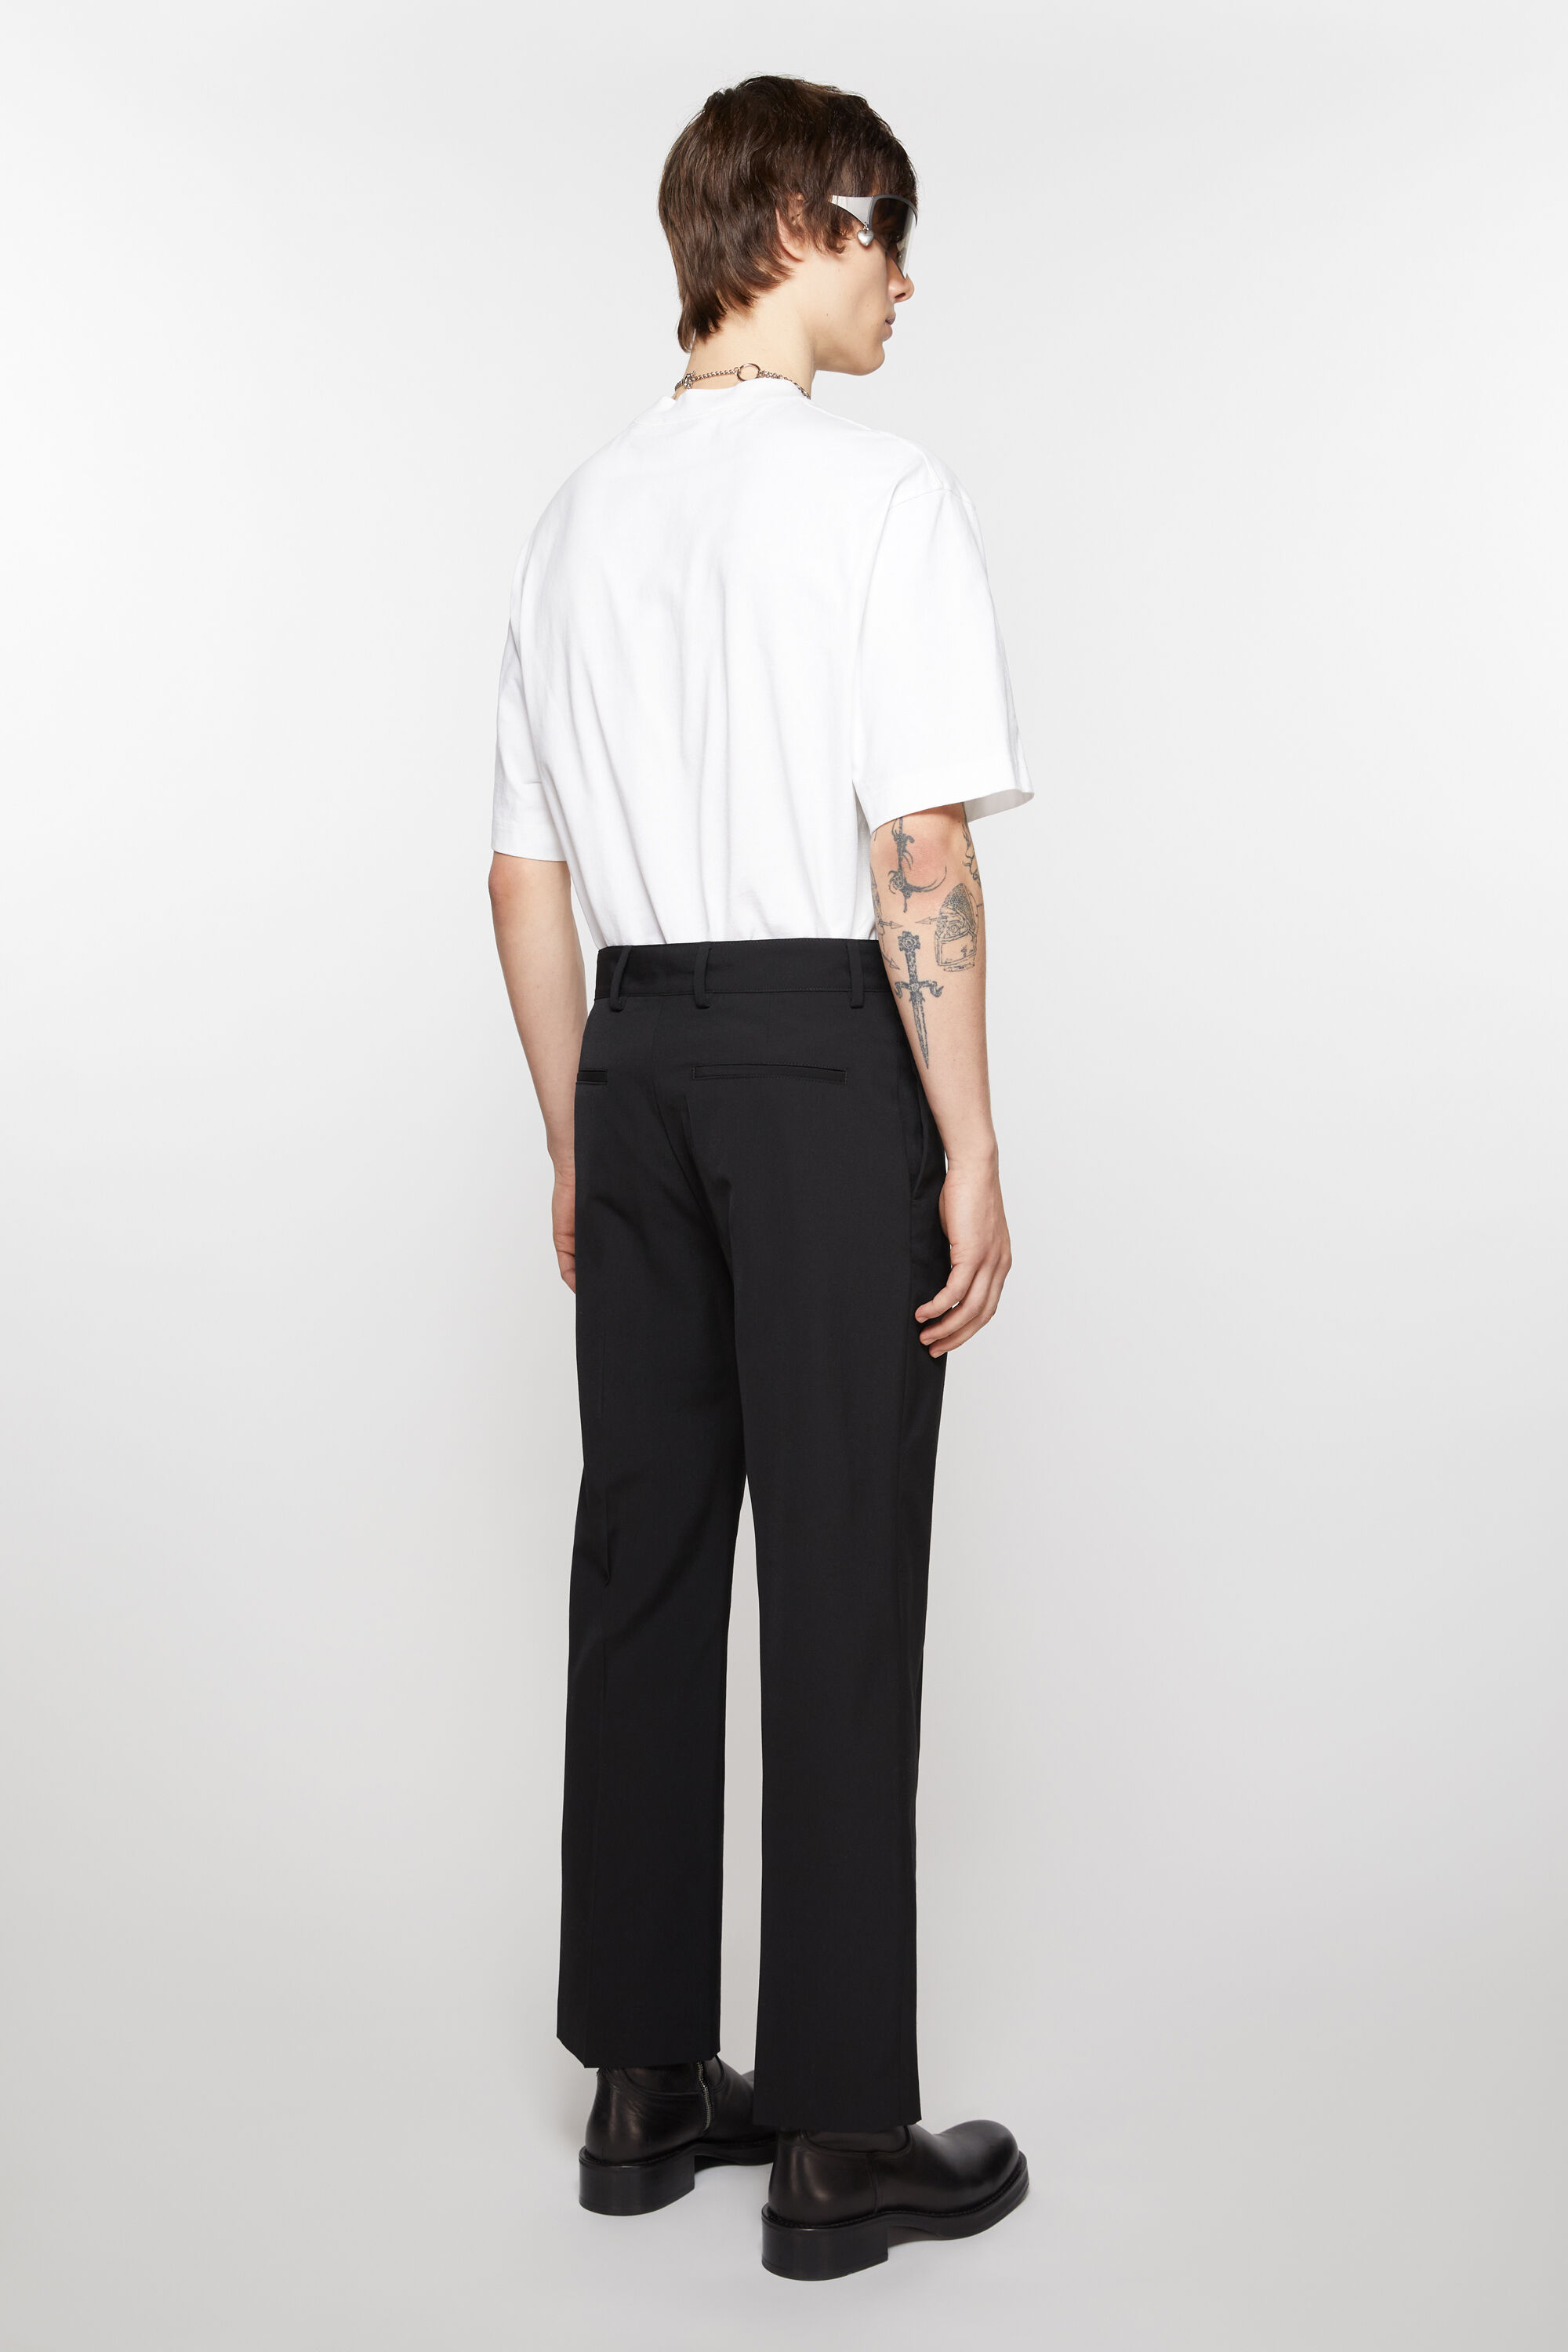 TAILORED TROUSERS BY FOSHU – Locali